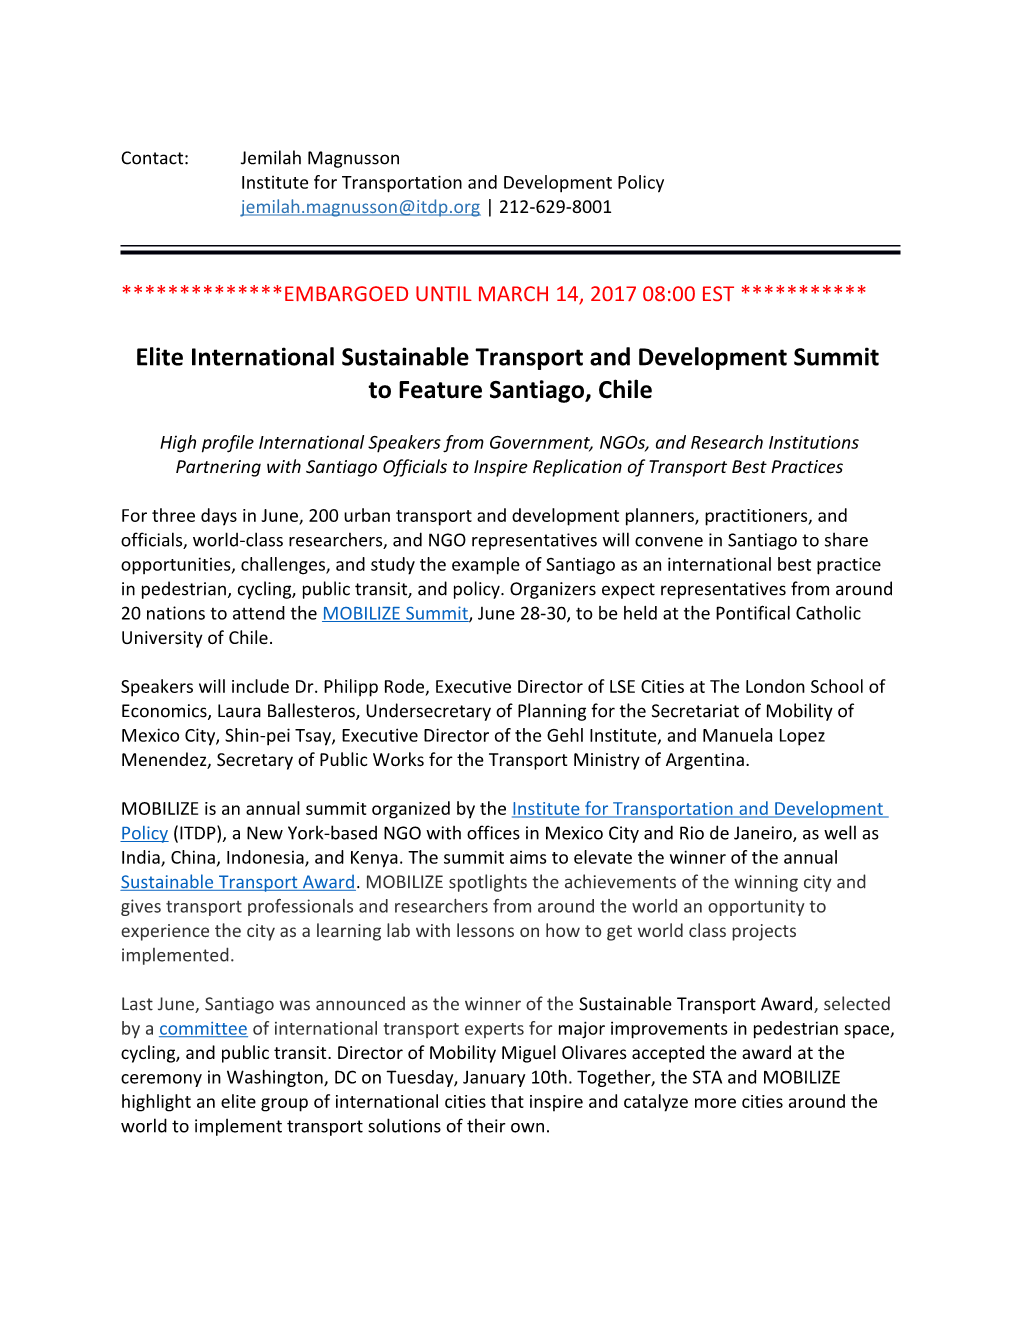 Institute for Transportation and Development Policy